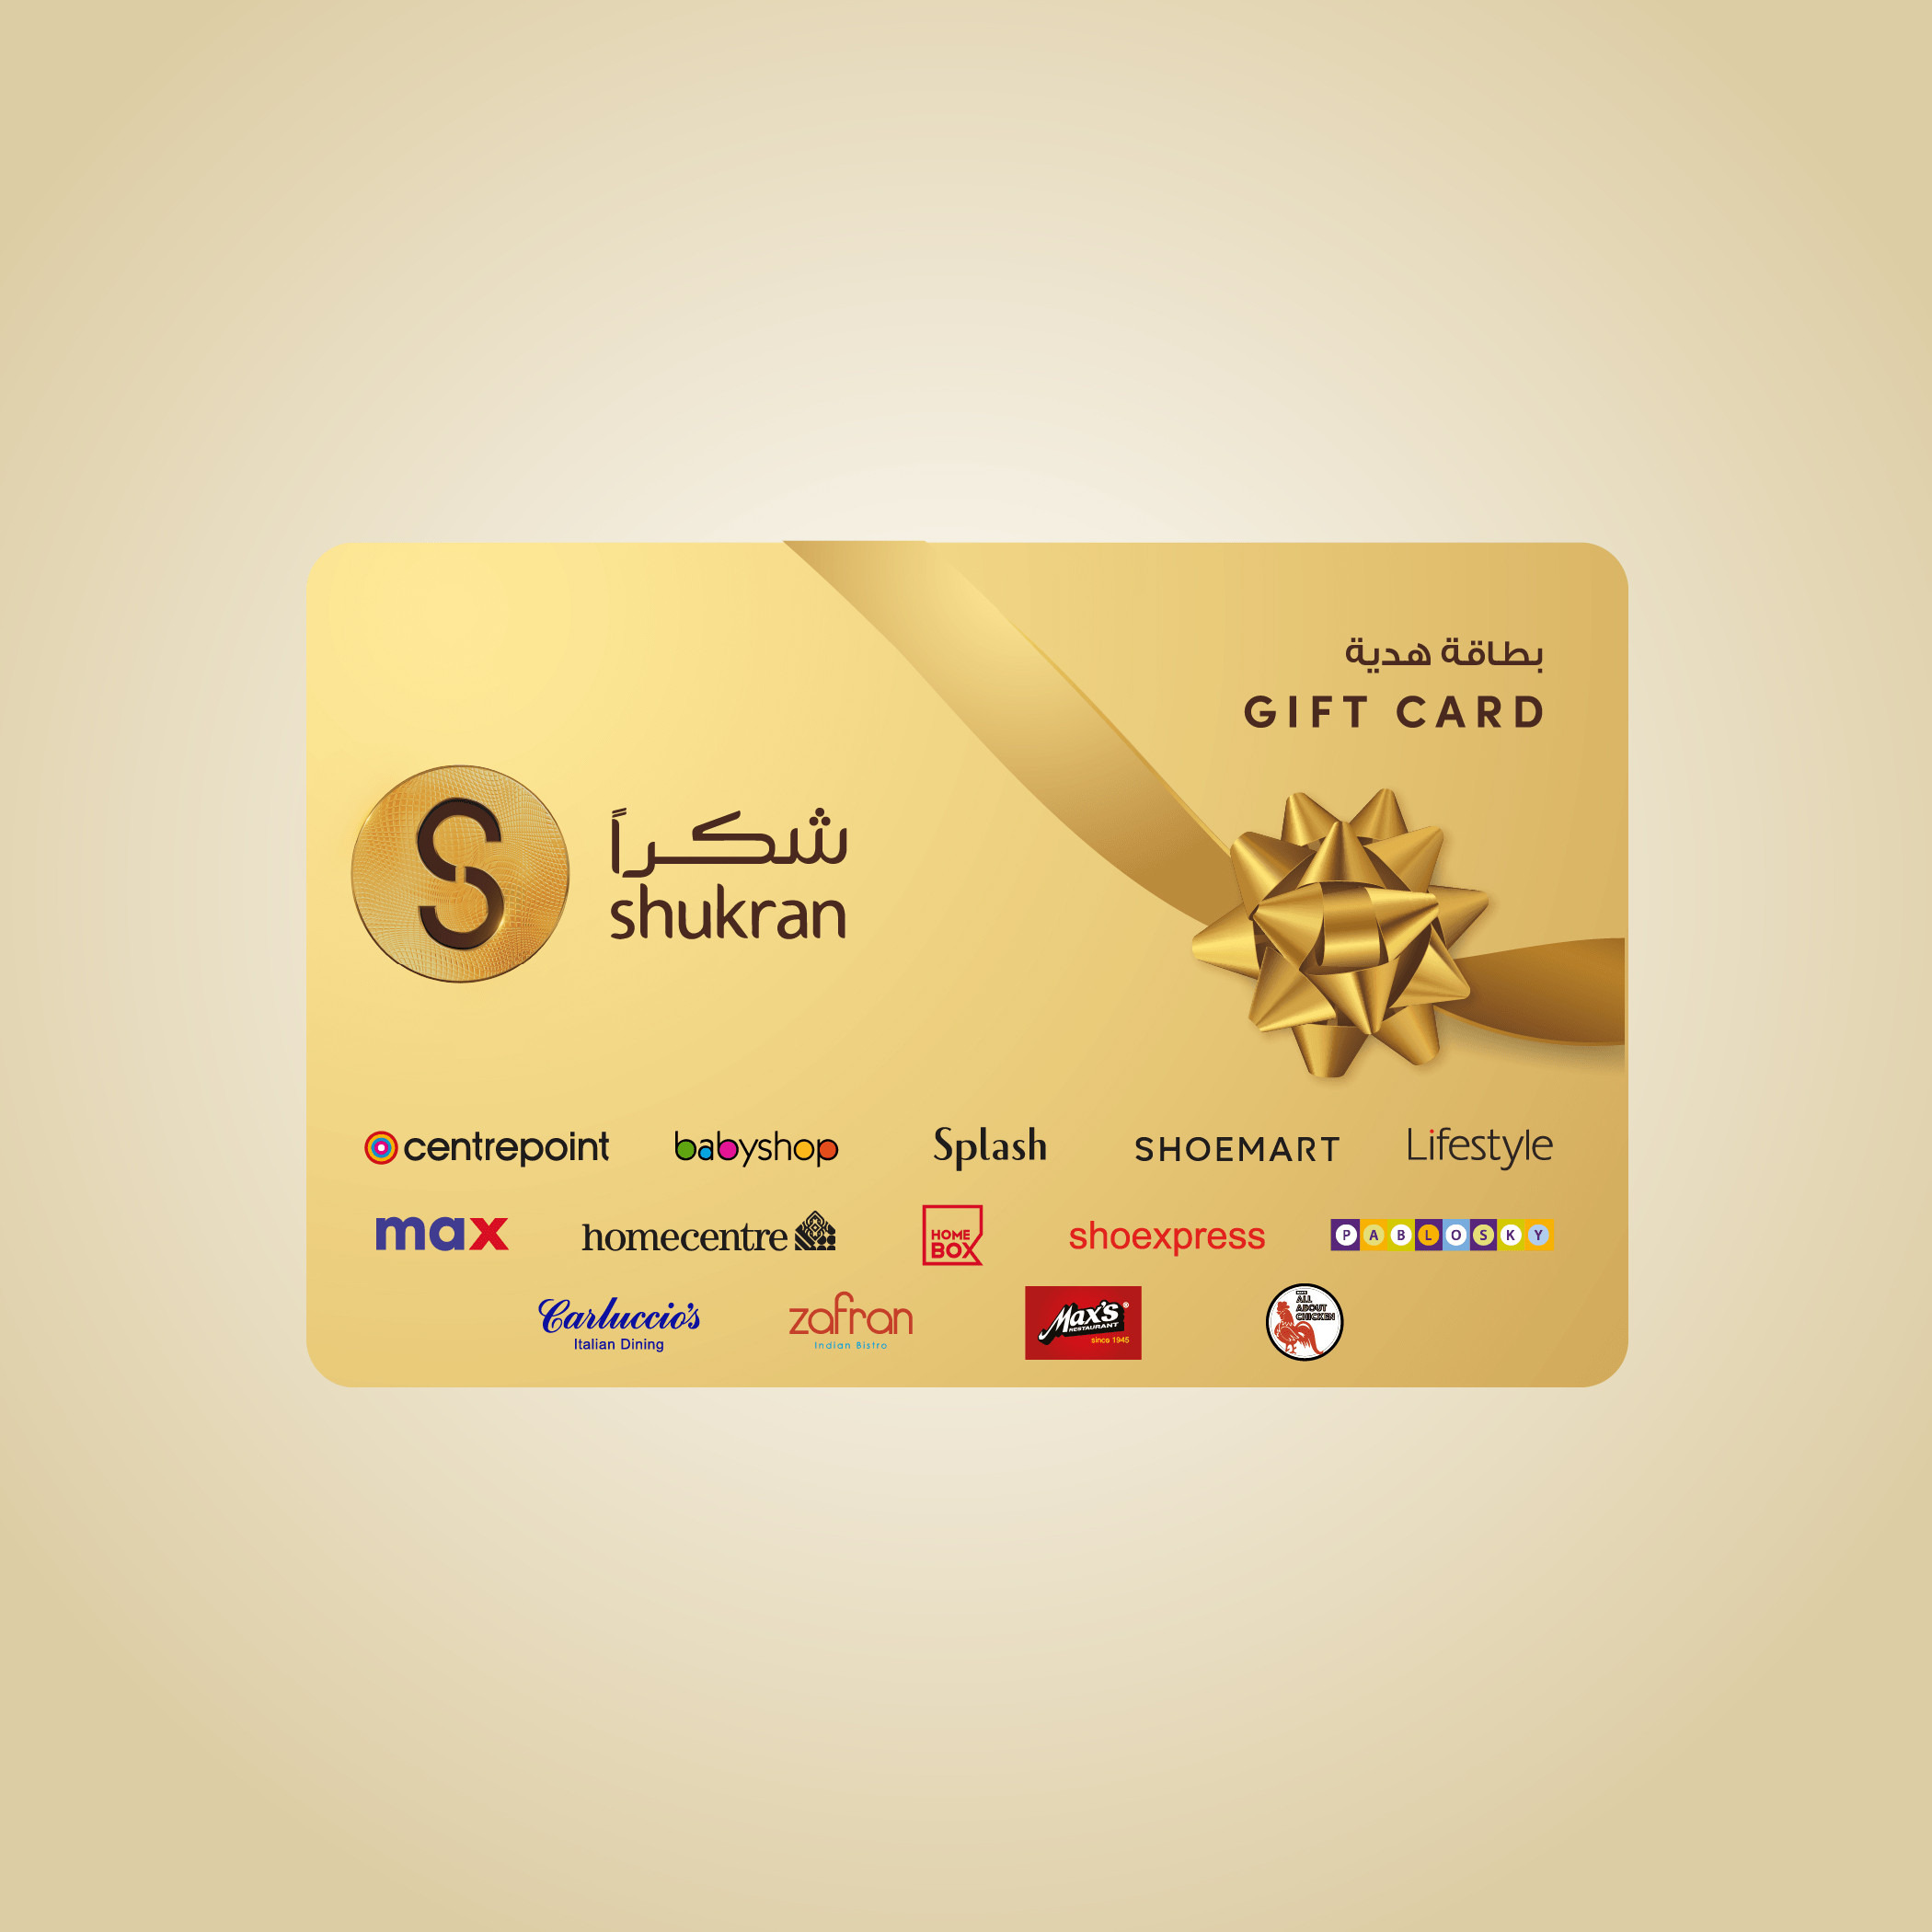 Experience endless possibilities with Shukran